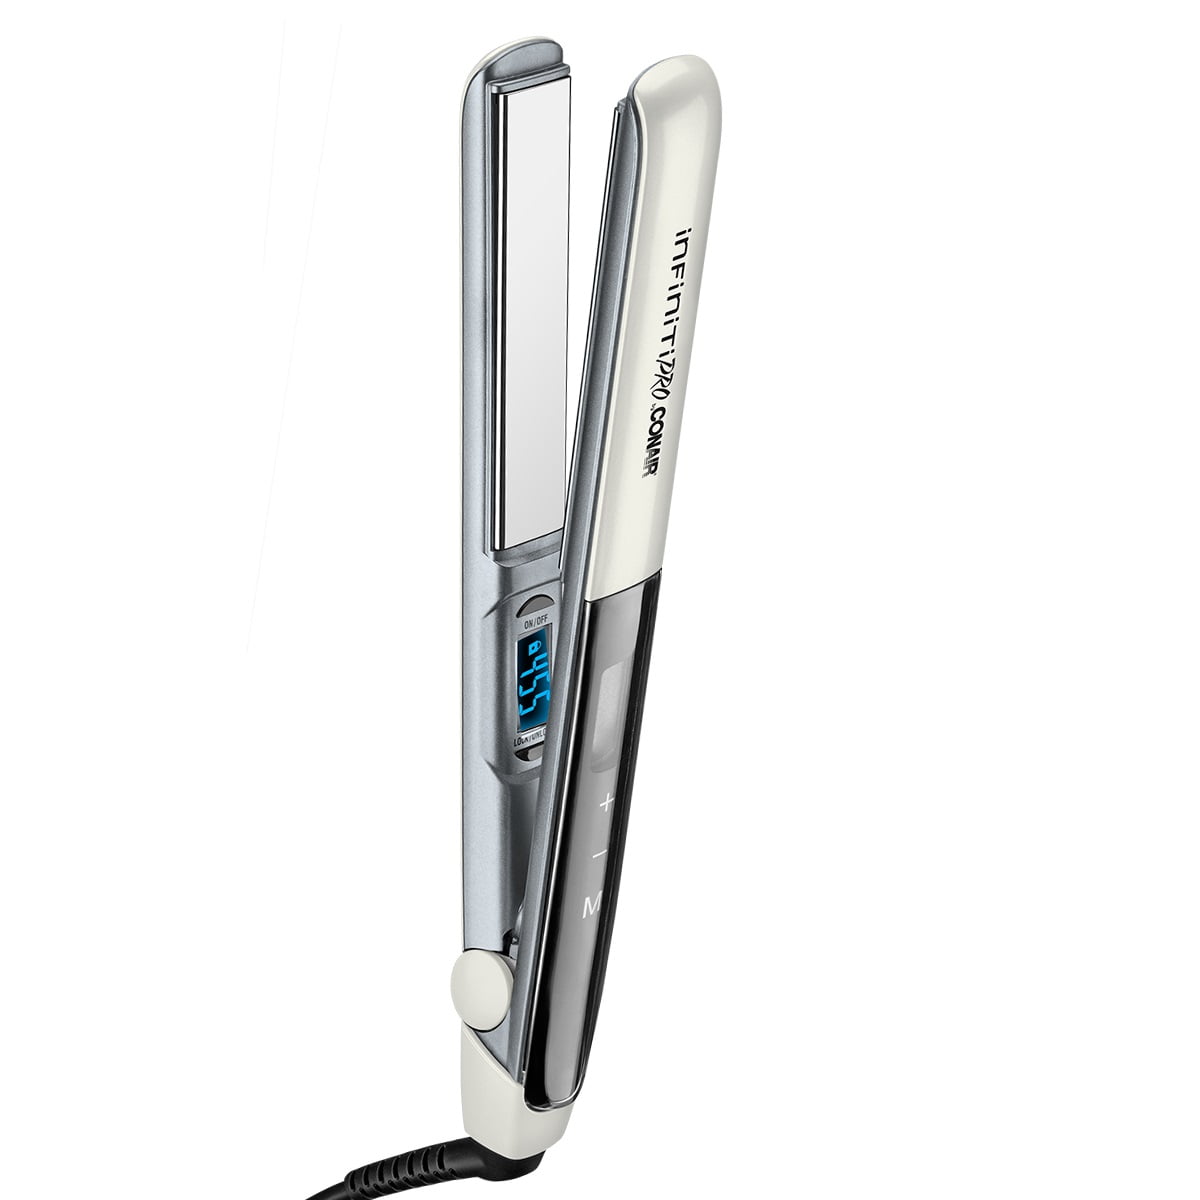 InfinitiPRO by Conair 1-INCH (25MM) TITANIUM PLATED FLAT IRON 